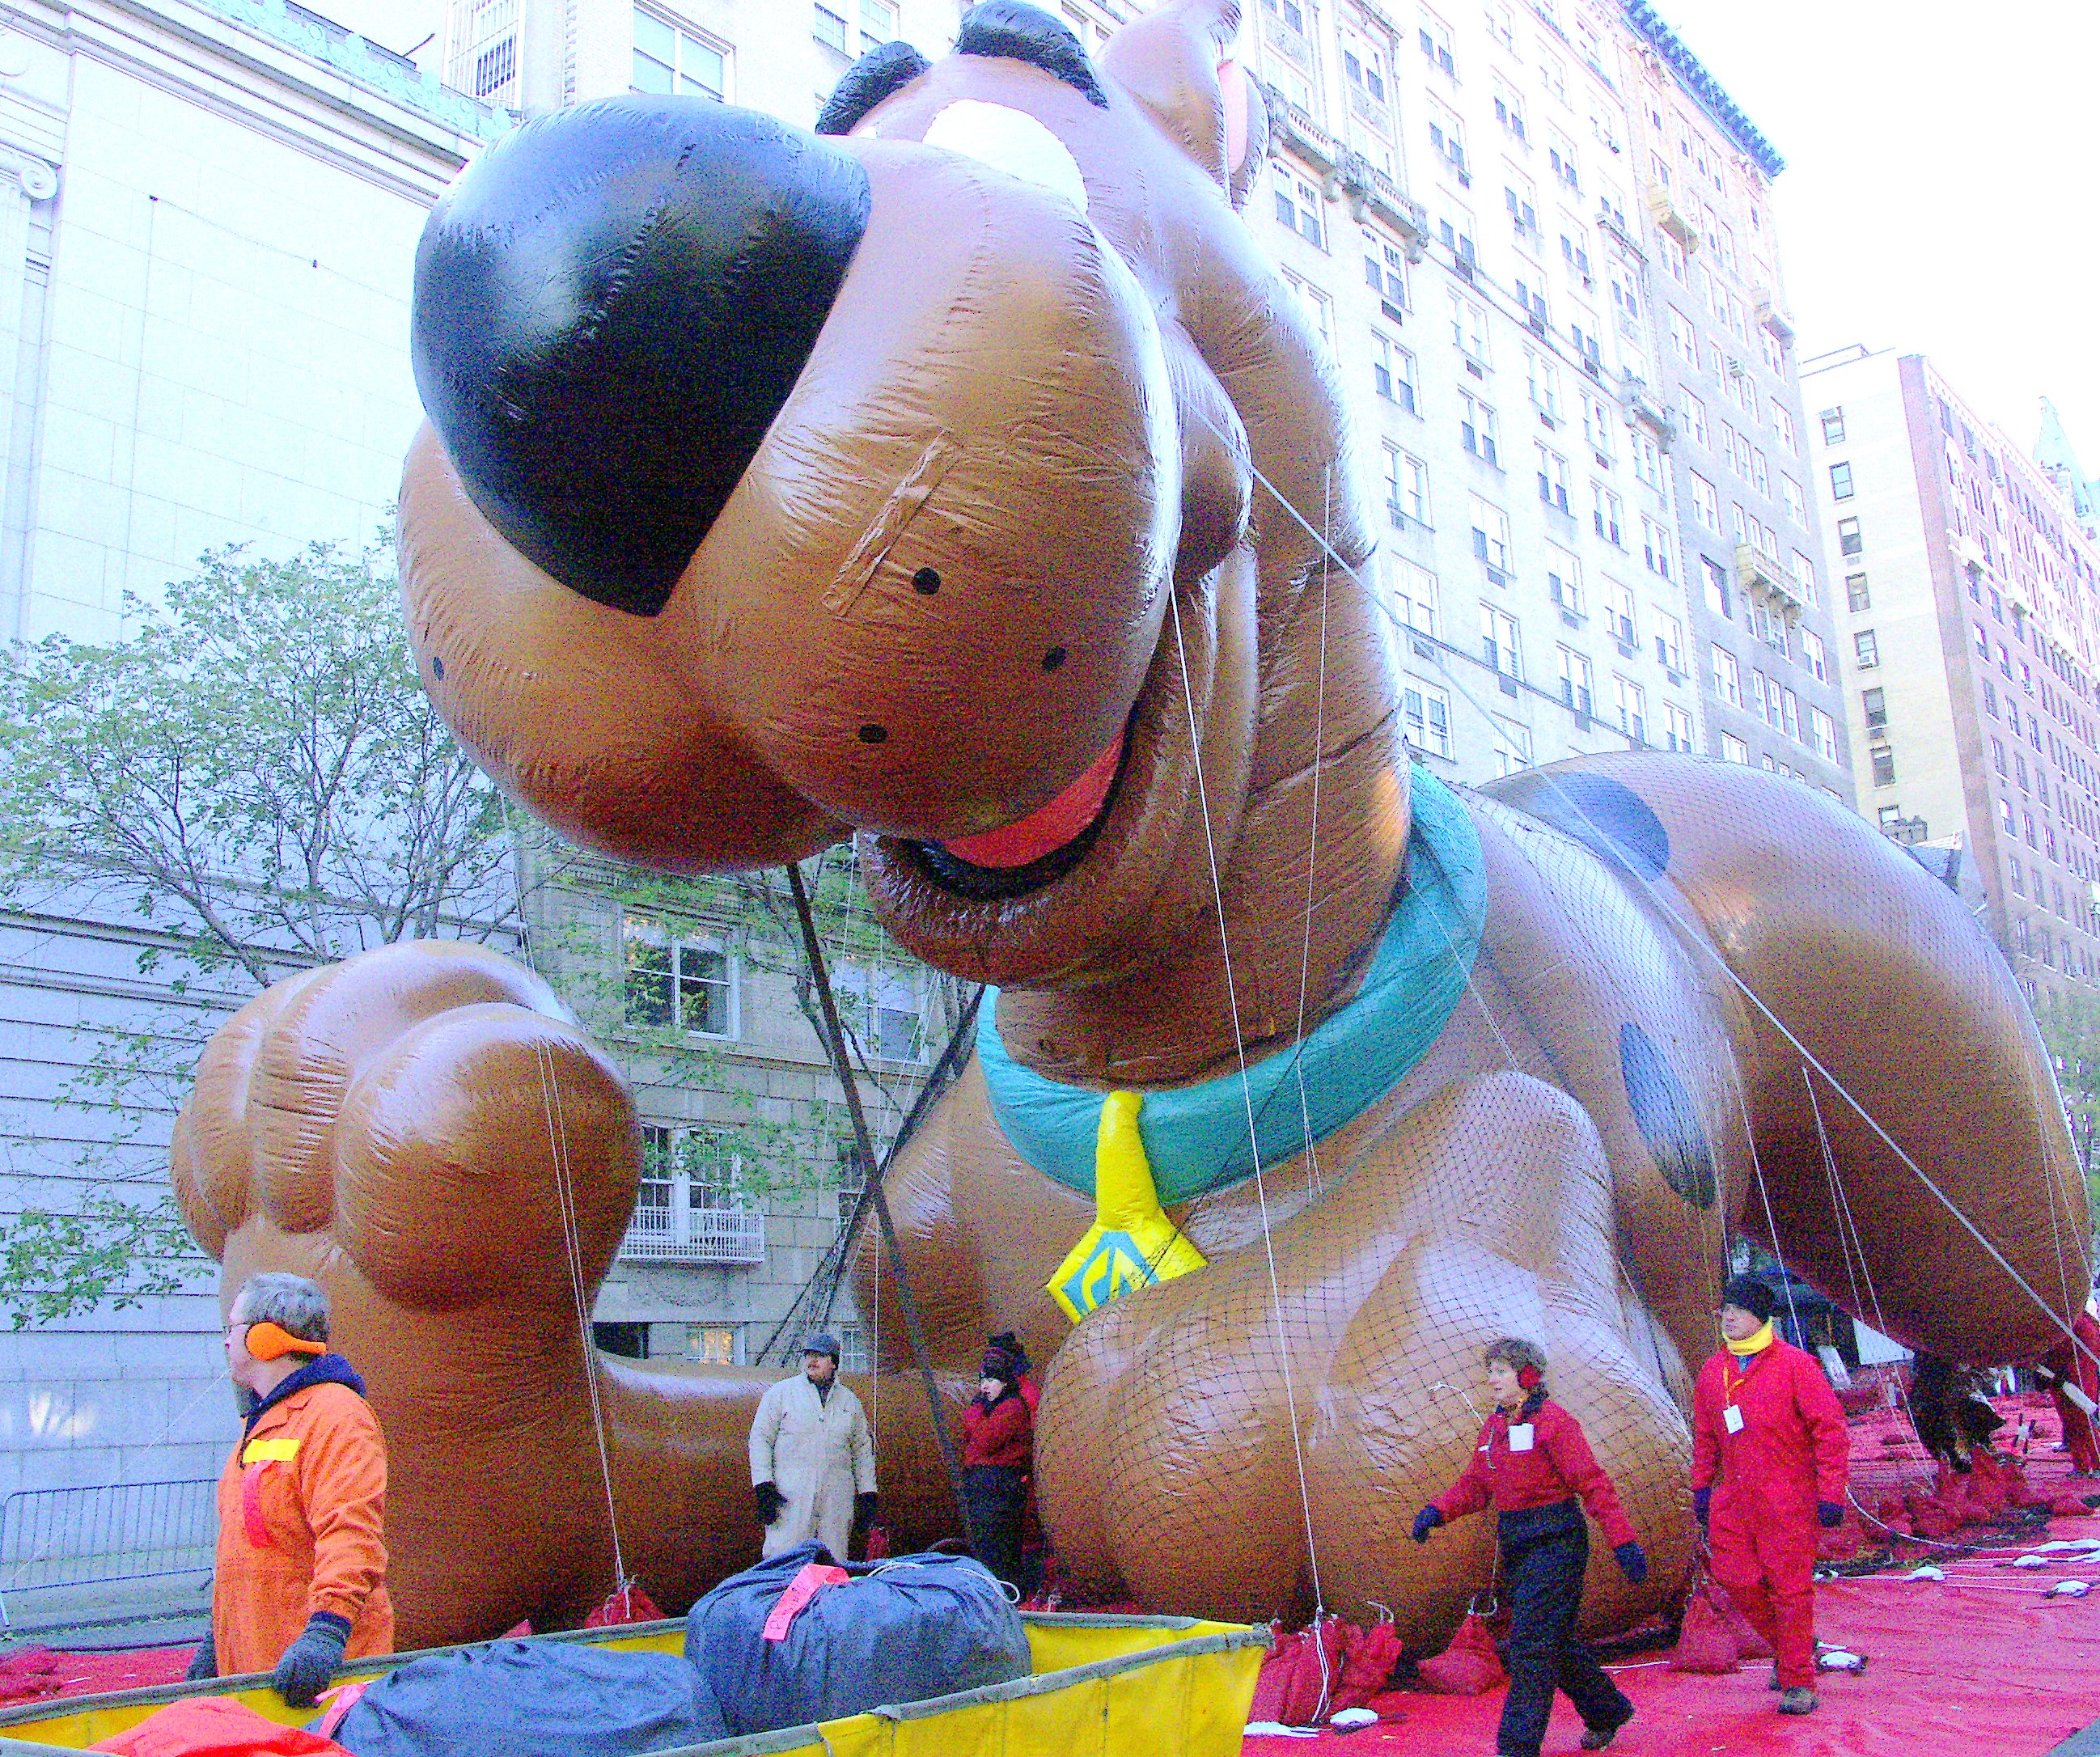 macys-giant-balloon-inflation-draws-more-than-1-million-spectators-the-day-before-thanksgiving.jpg 